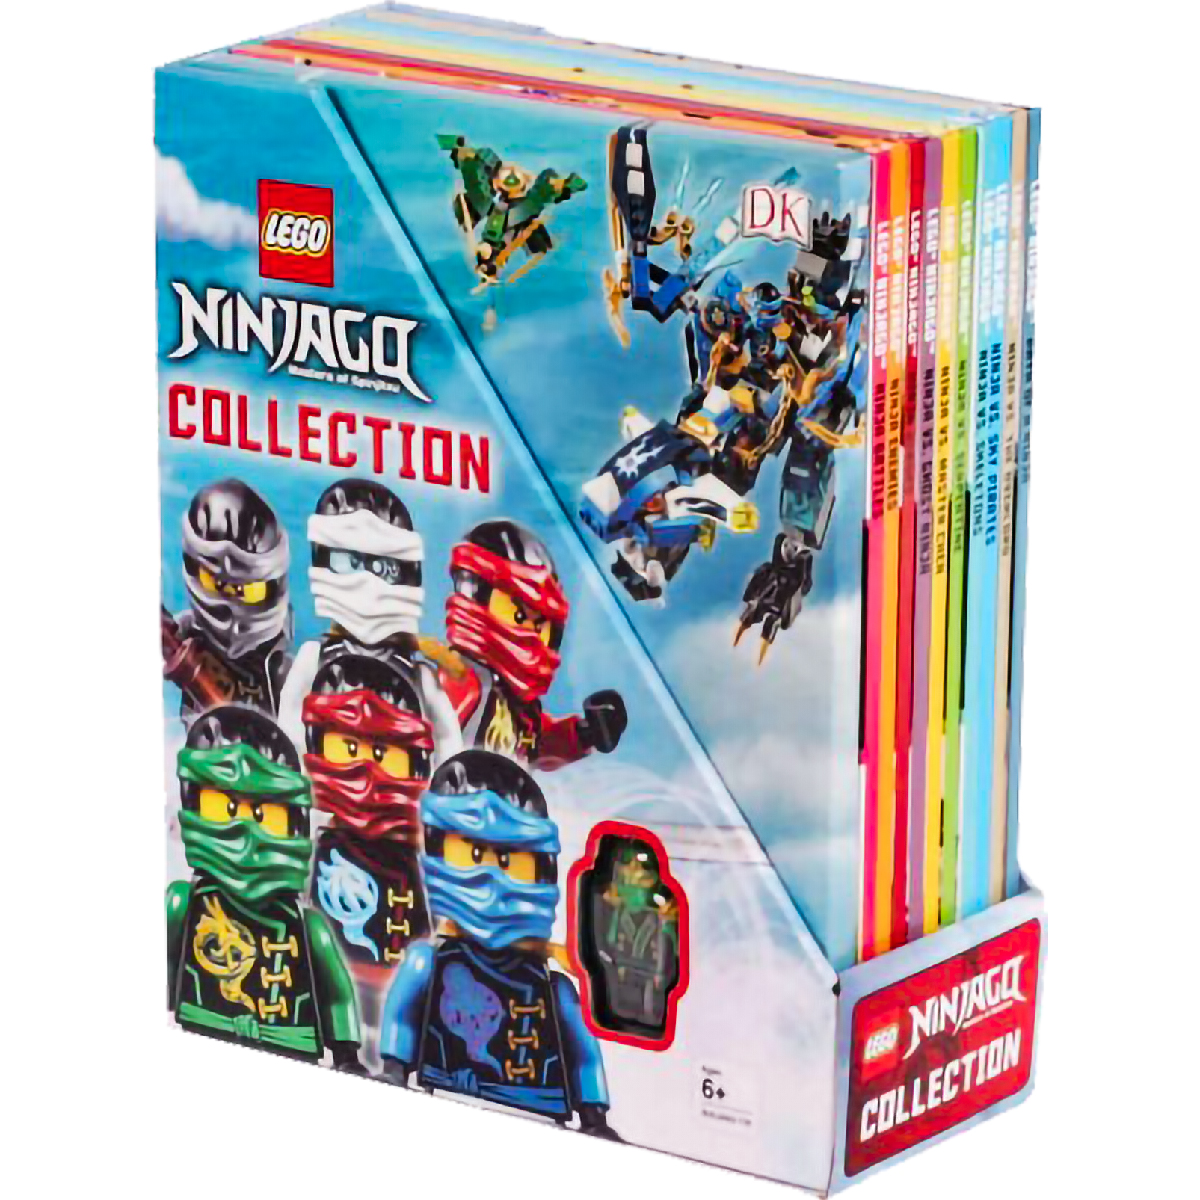 New LEGO NINJAGO book with exclusive minifigure revealed